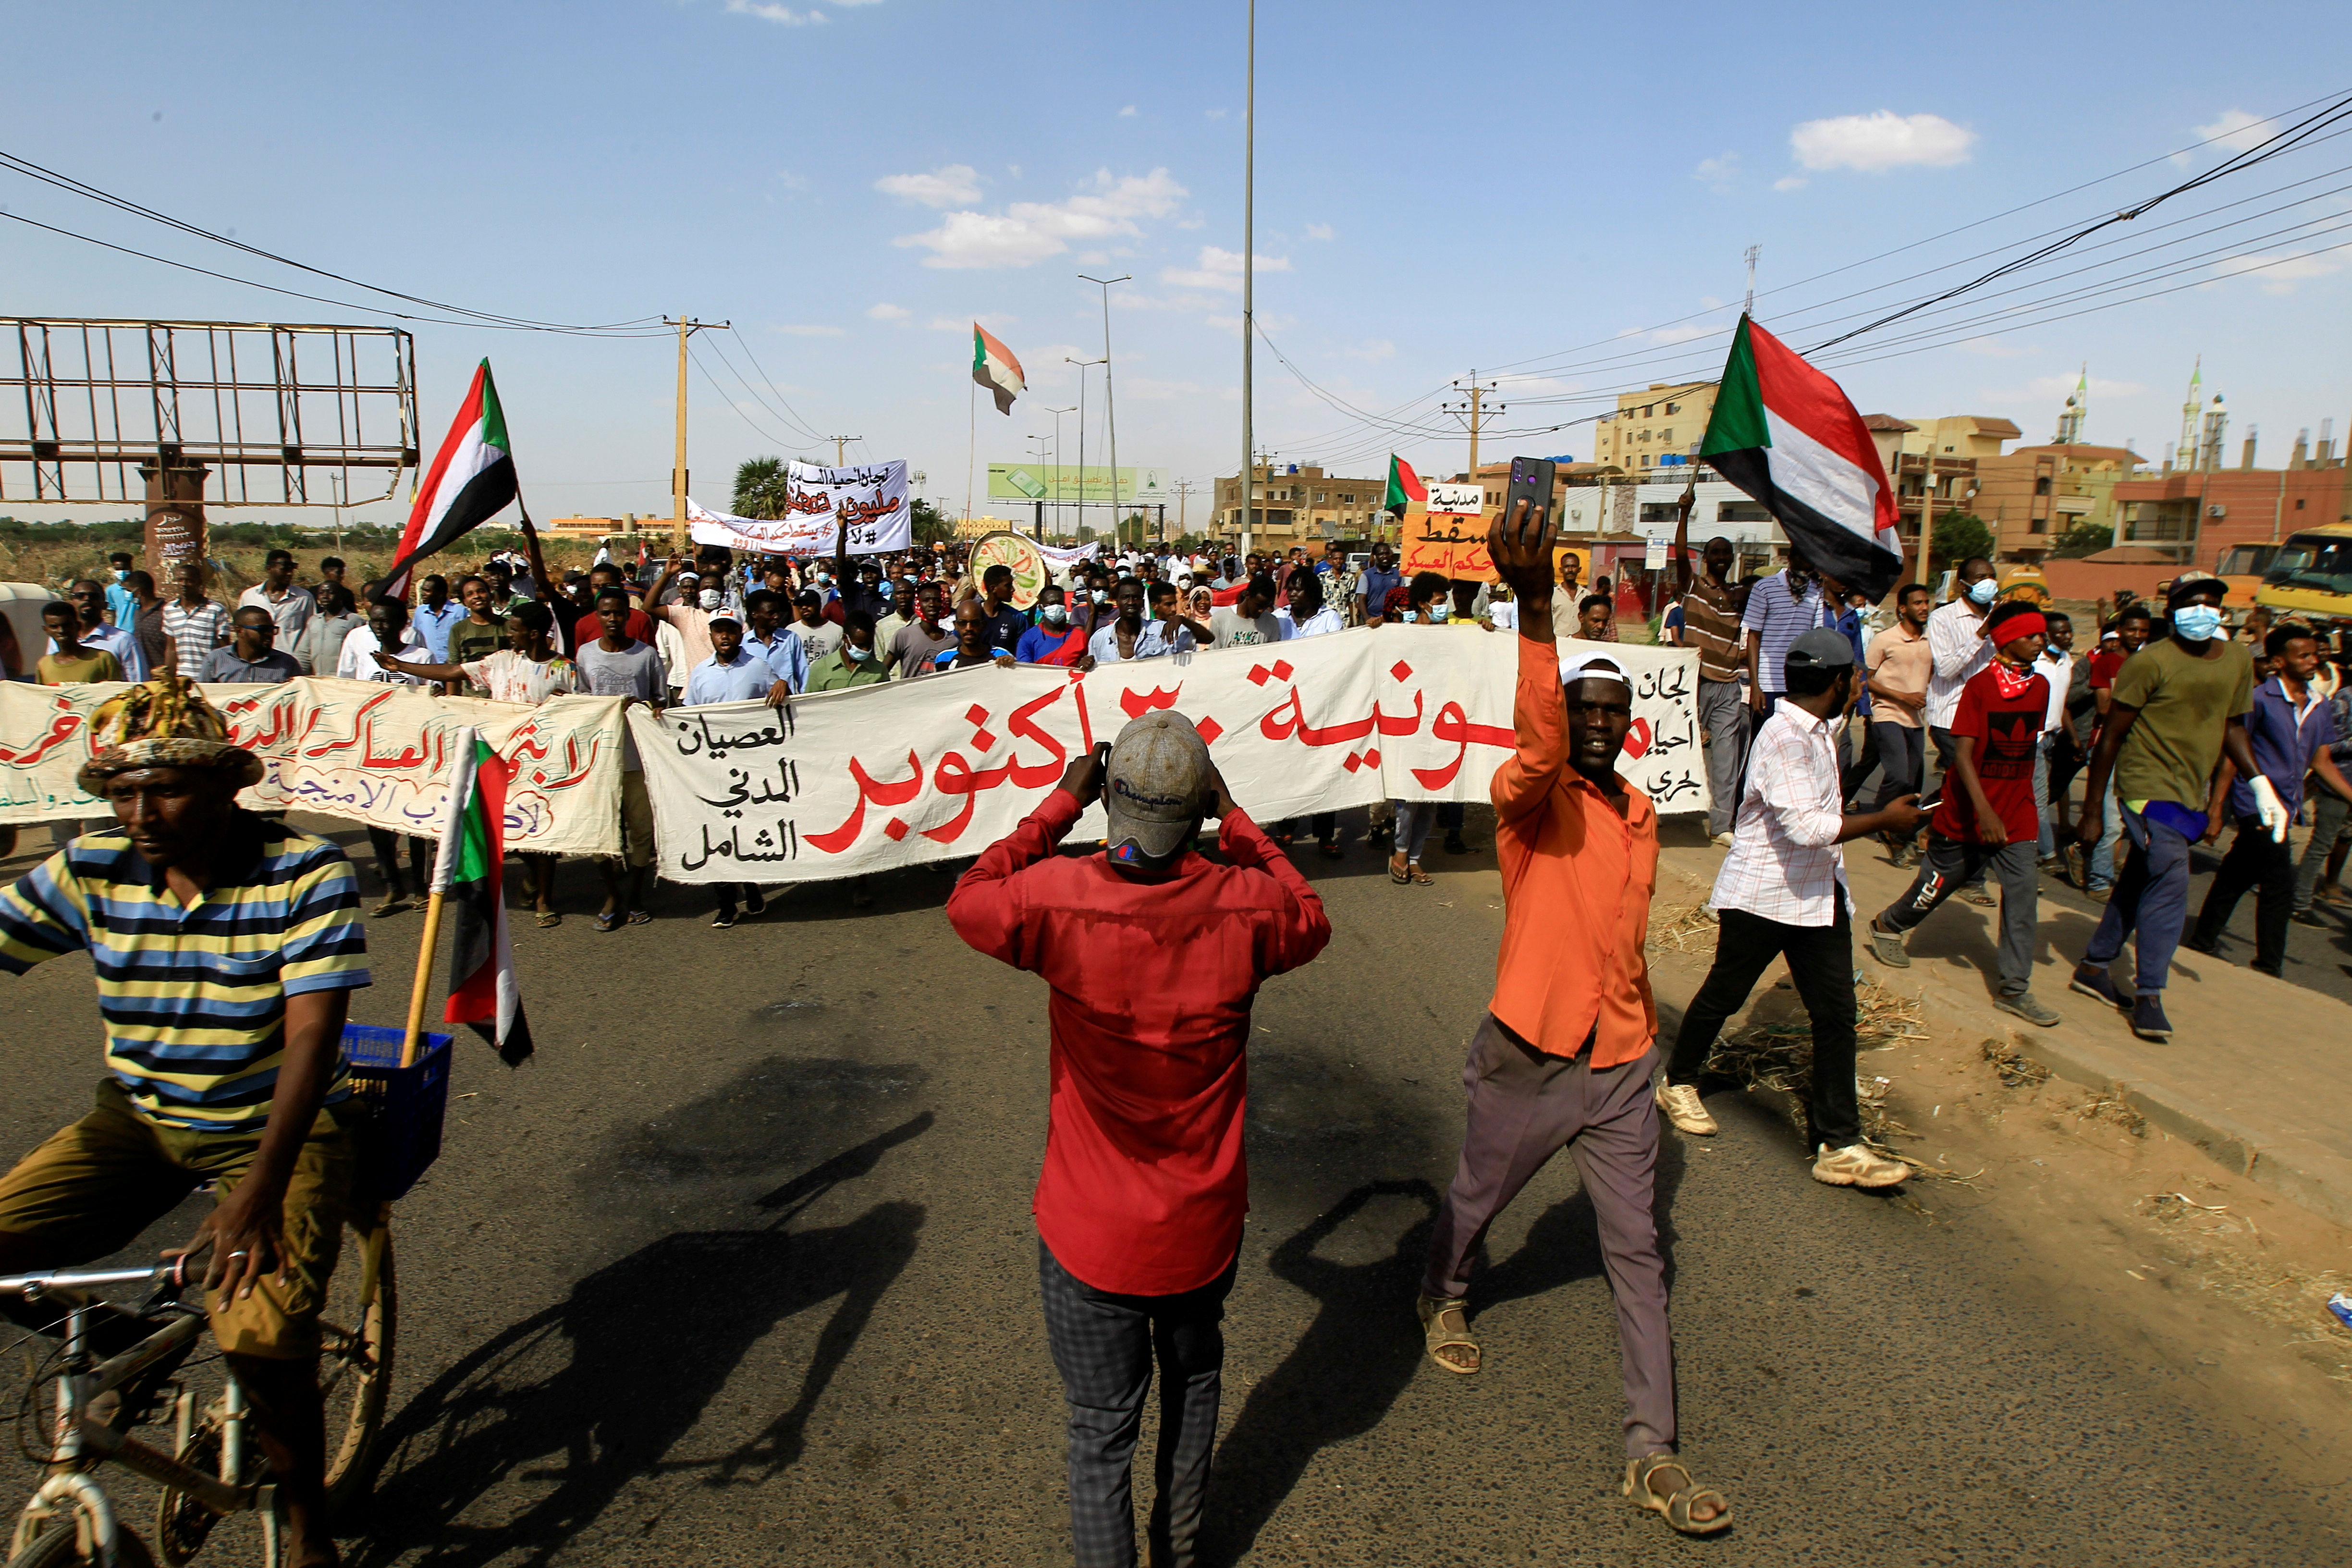 Protesters carry a banner and national flags as they march against the Sudanese military's recent seizure of power and ousting of the civilian government, in the streets of the capital Khartoum, Sudan October 30, 2021. REUTERS/Mohamed Nureldin